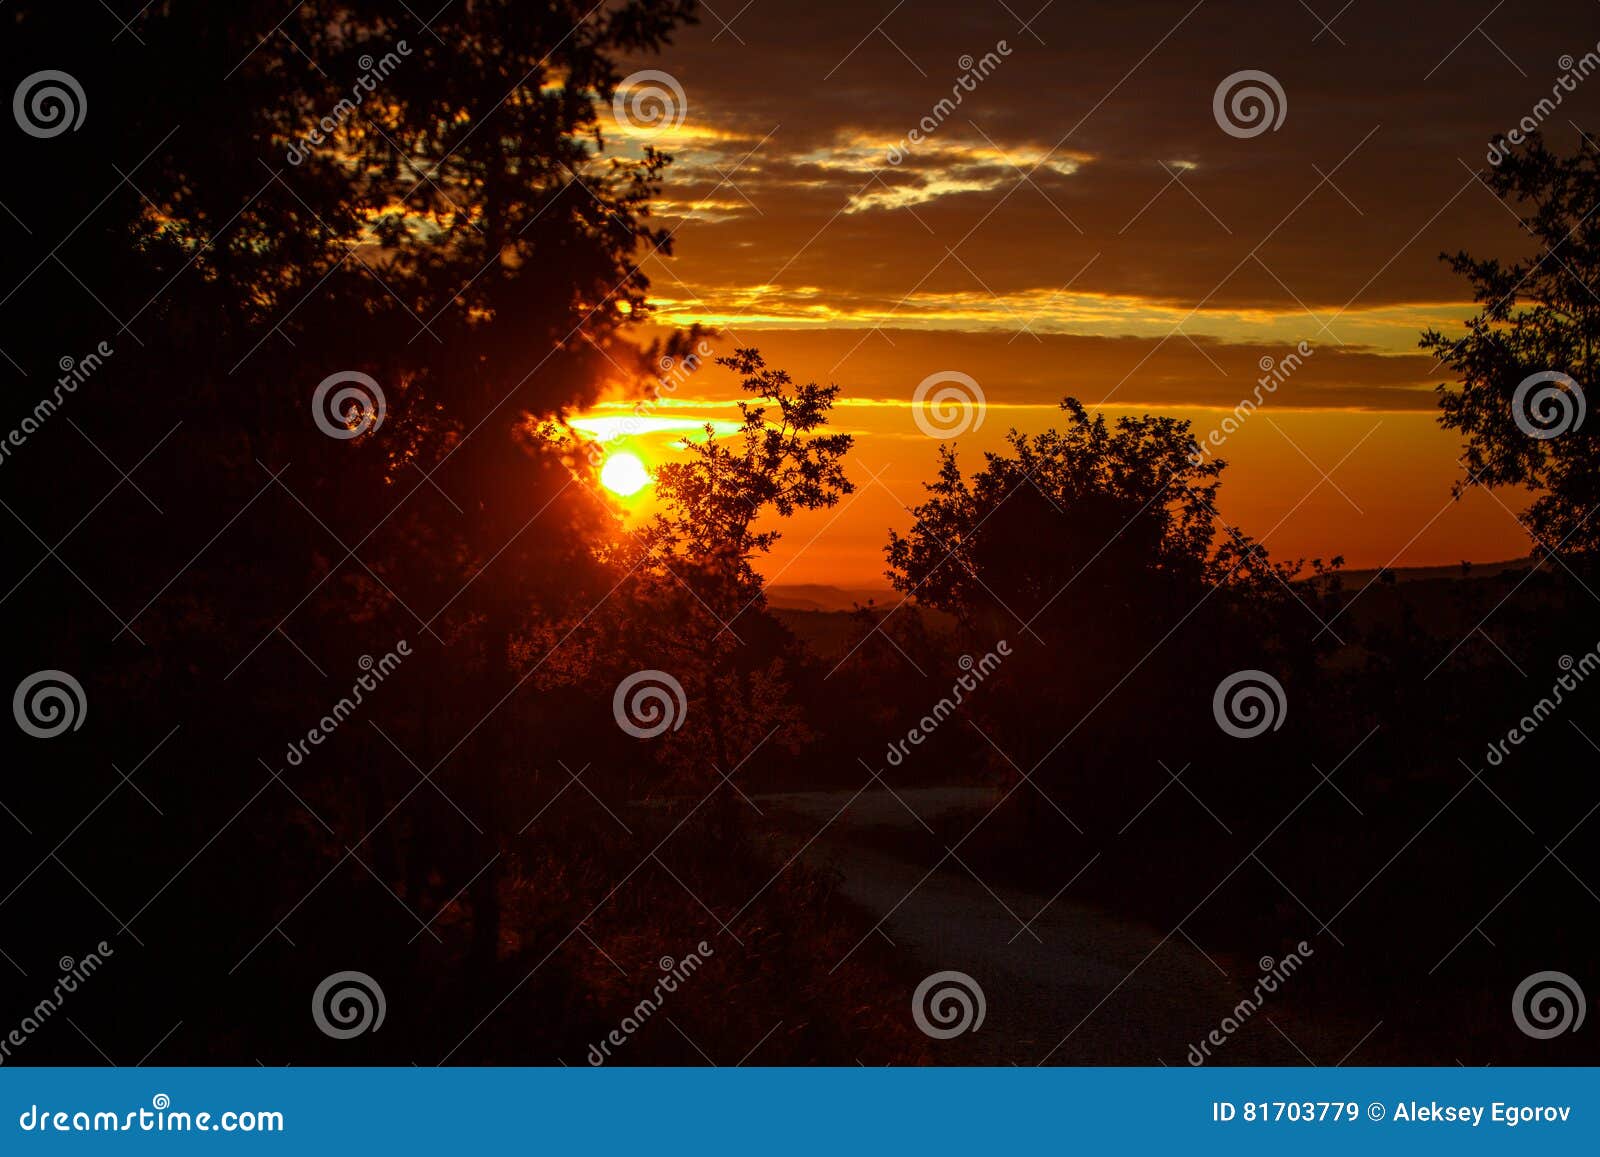 Sunrise in the Early Morning Stock Image - Image of evening, shine ...